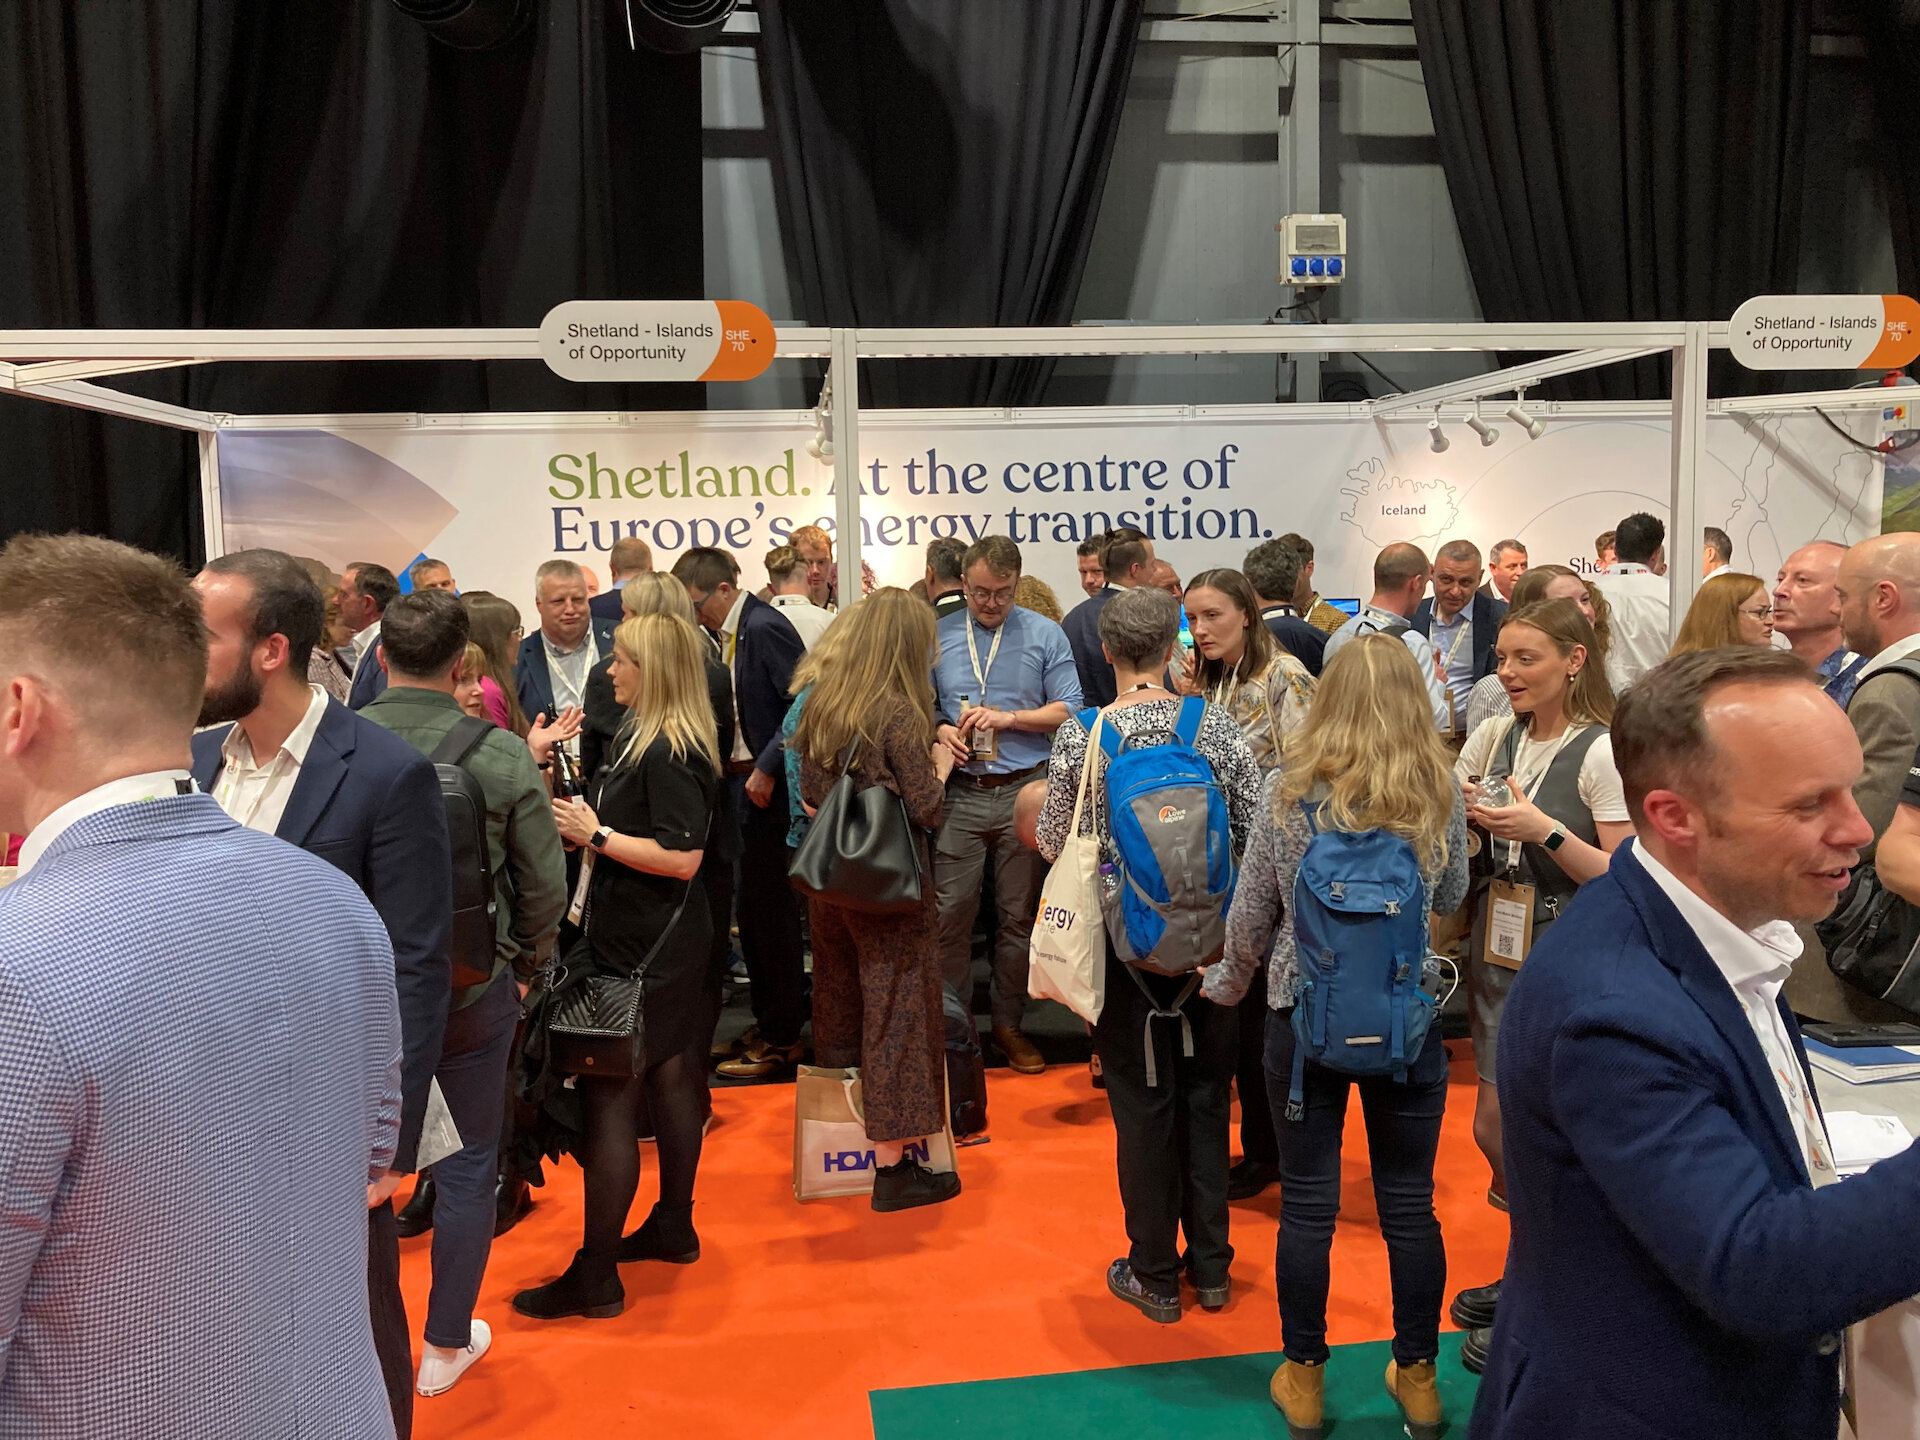 The Shetland: Islands of Opportunity stand generated a lot of interest at All Energy.